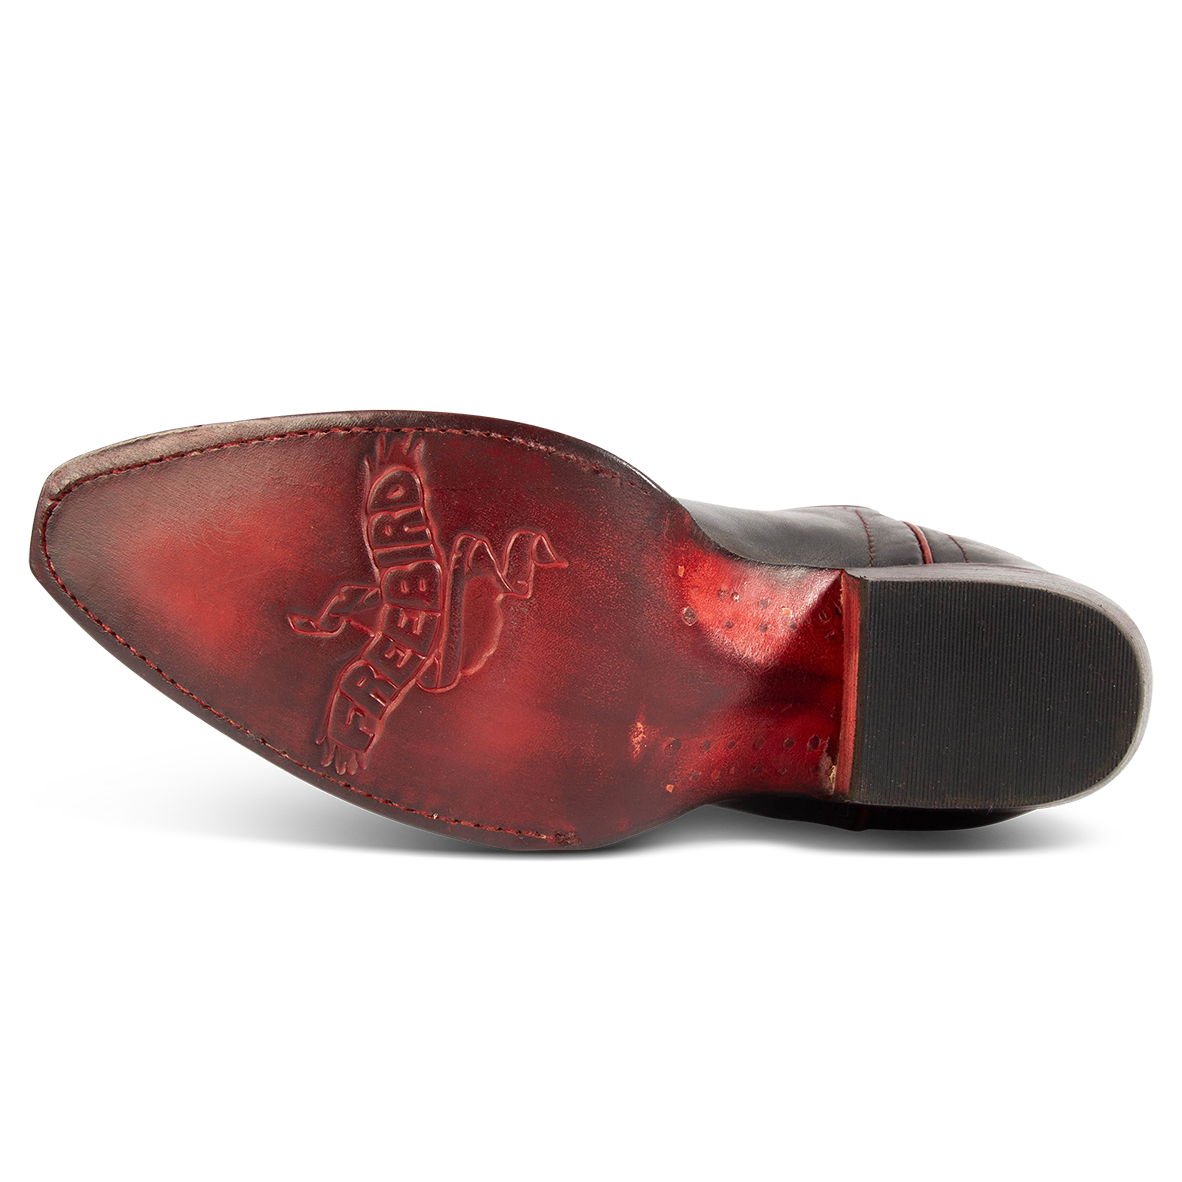 Red leather sole imprinted with FREEBIRD on women's Starzz red western boot